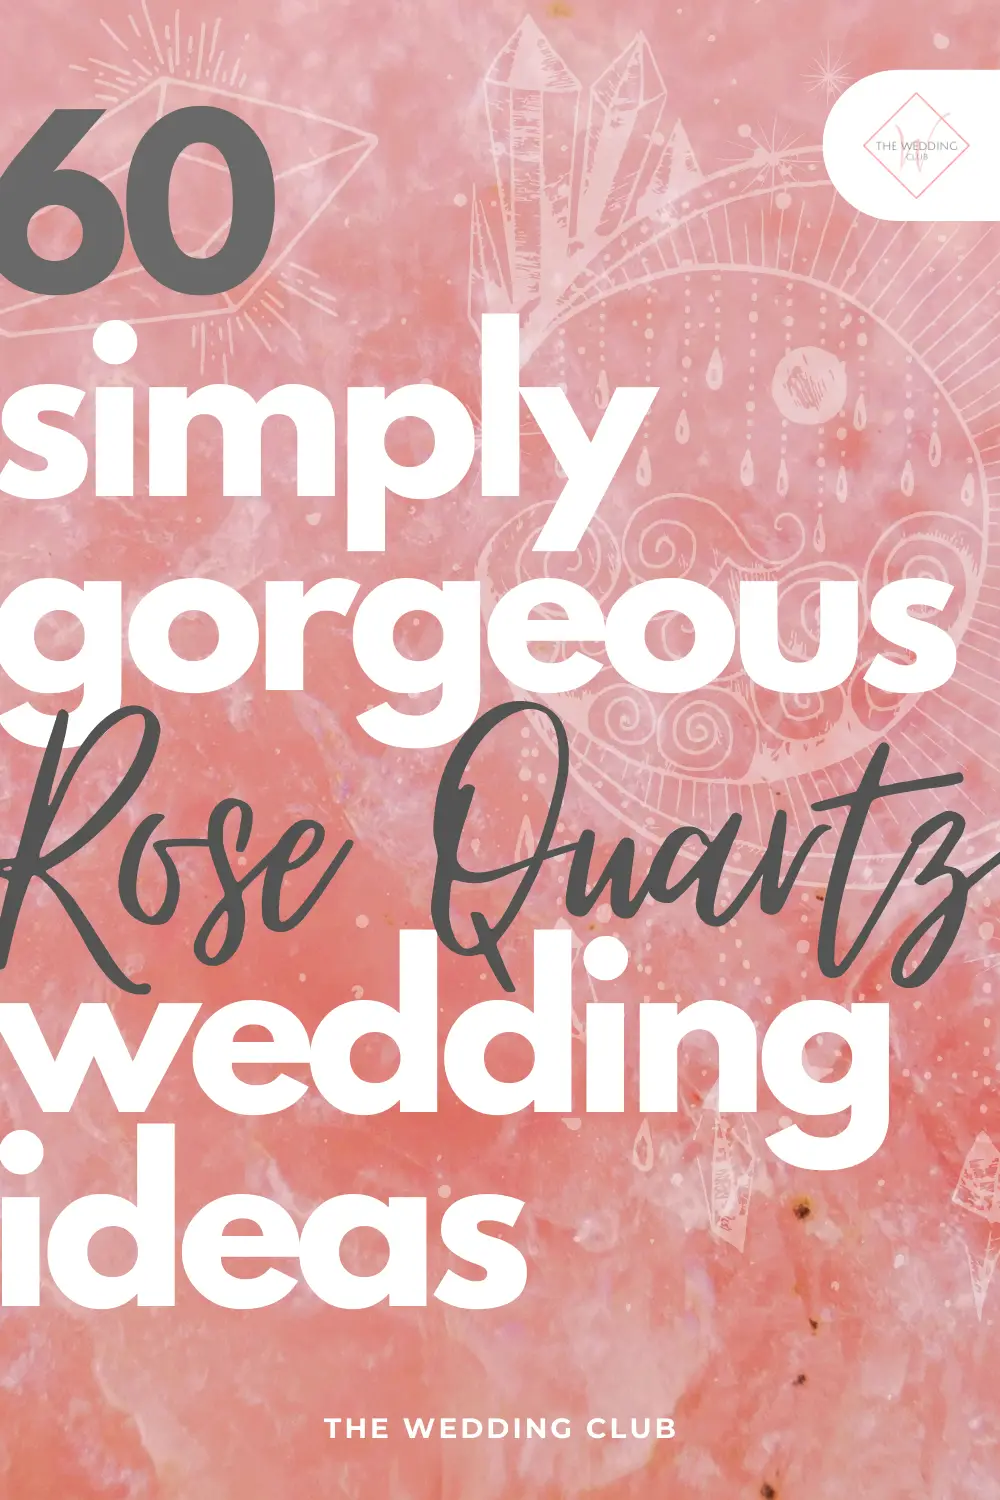 60 Simply gorgeous rose quartz wedding ideas - There's something heart warming about rose quartz whenever we encounter it somewhere. Whether it's at a jewelry store, a home decor store or at your local garden center, it's a certain mineral quartz that will always be around, and can be included at your wedding, too.